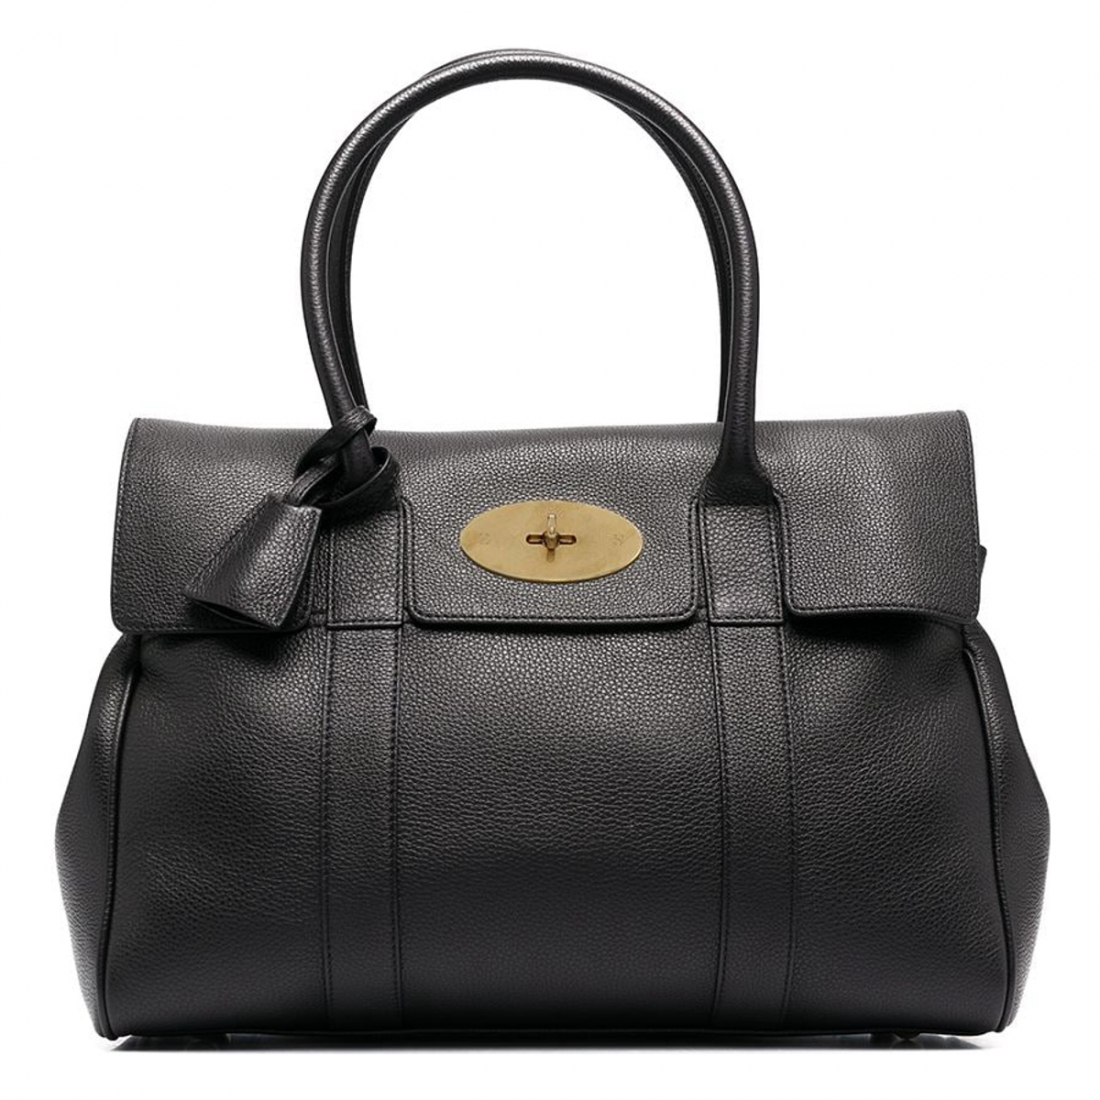 Women's 'Small Bayswater' Tote Bag